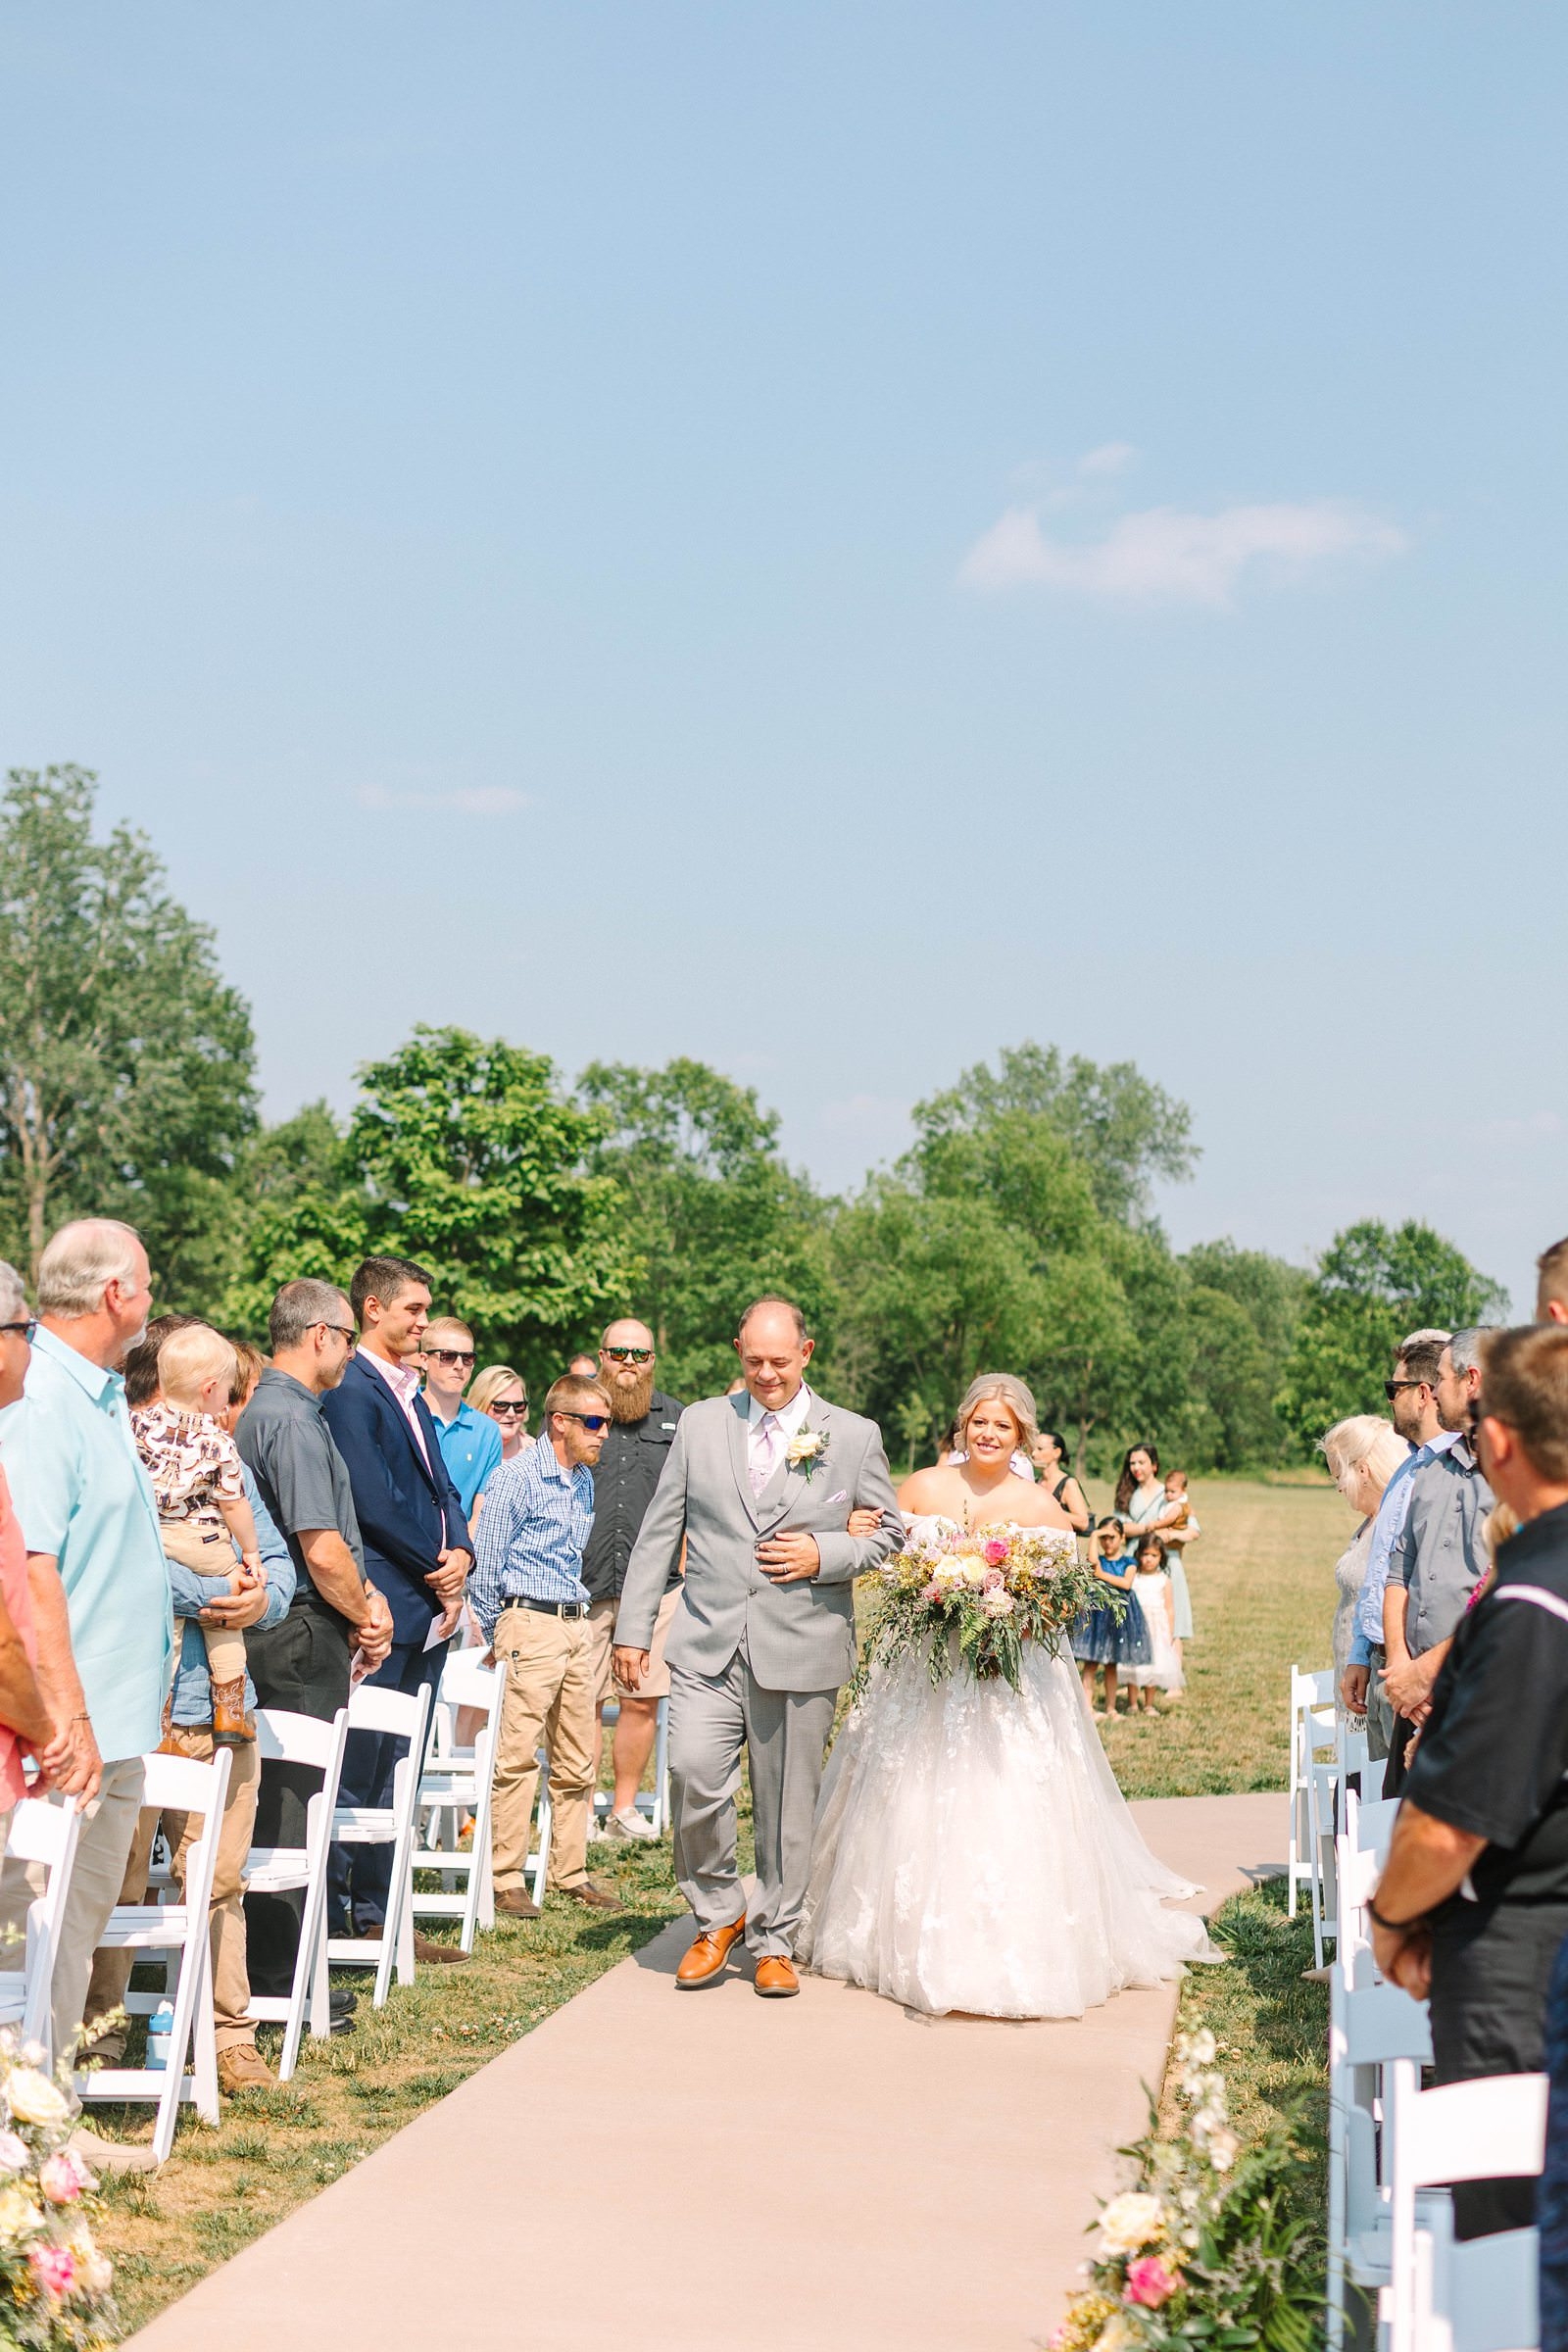 A Sunny Summer Wedding at Friedman Park in Newburgh Indiana | Paige and Dylan | Bret and Brandie Photography129.jpg